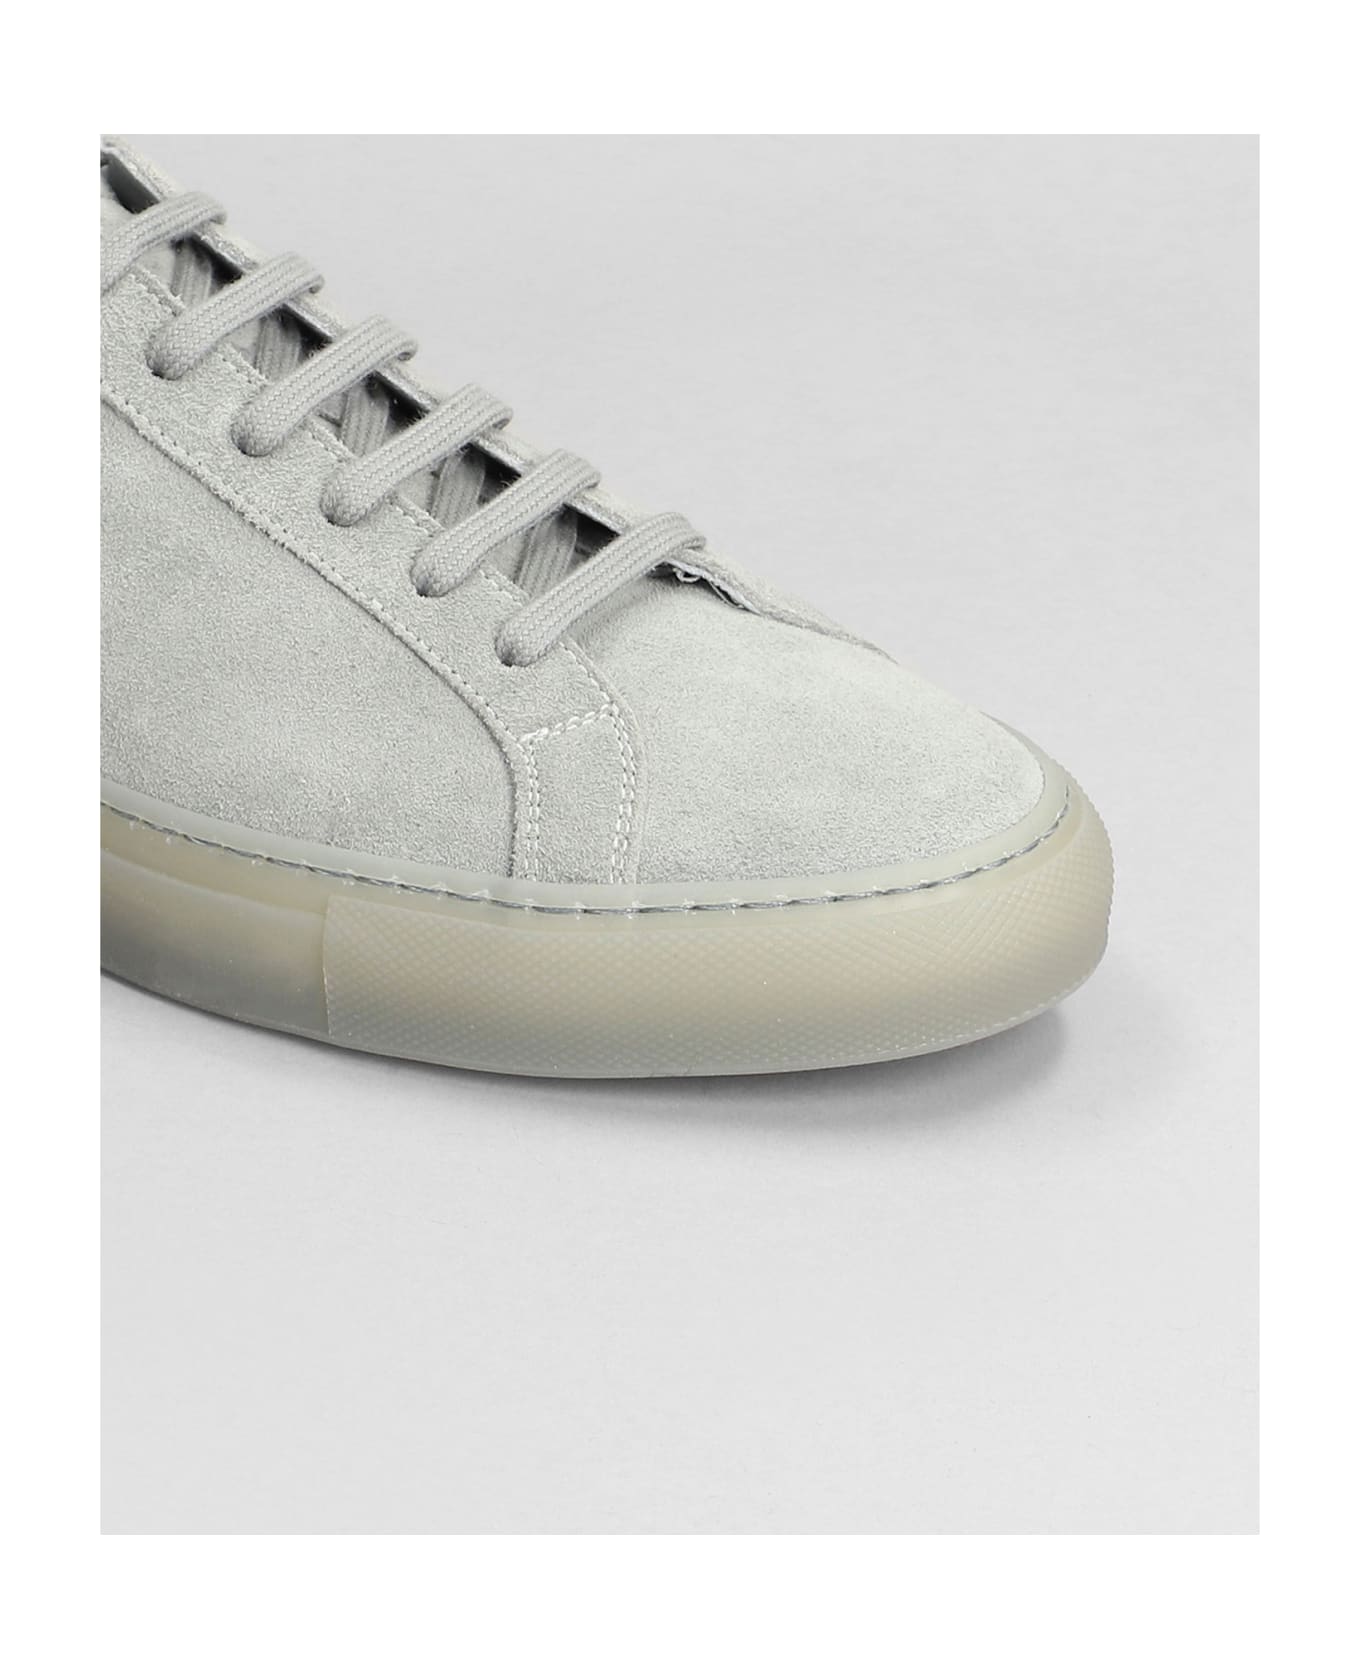 Common Projects Original Achilles Sneakers - grey スニーカー